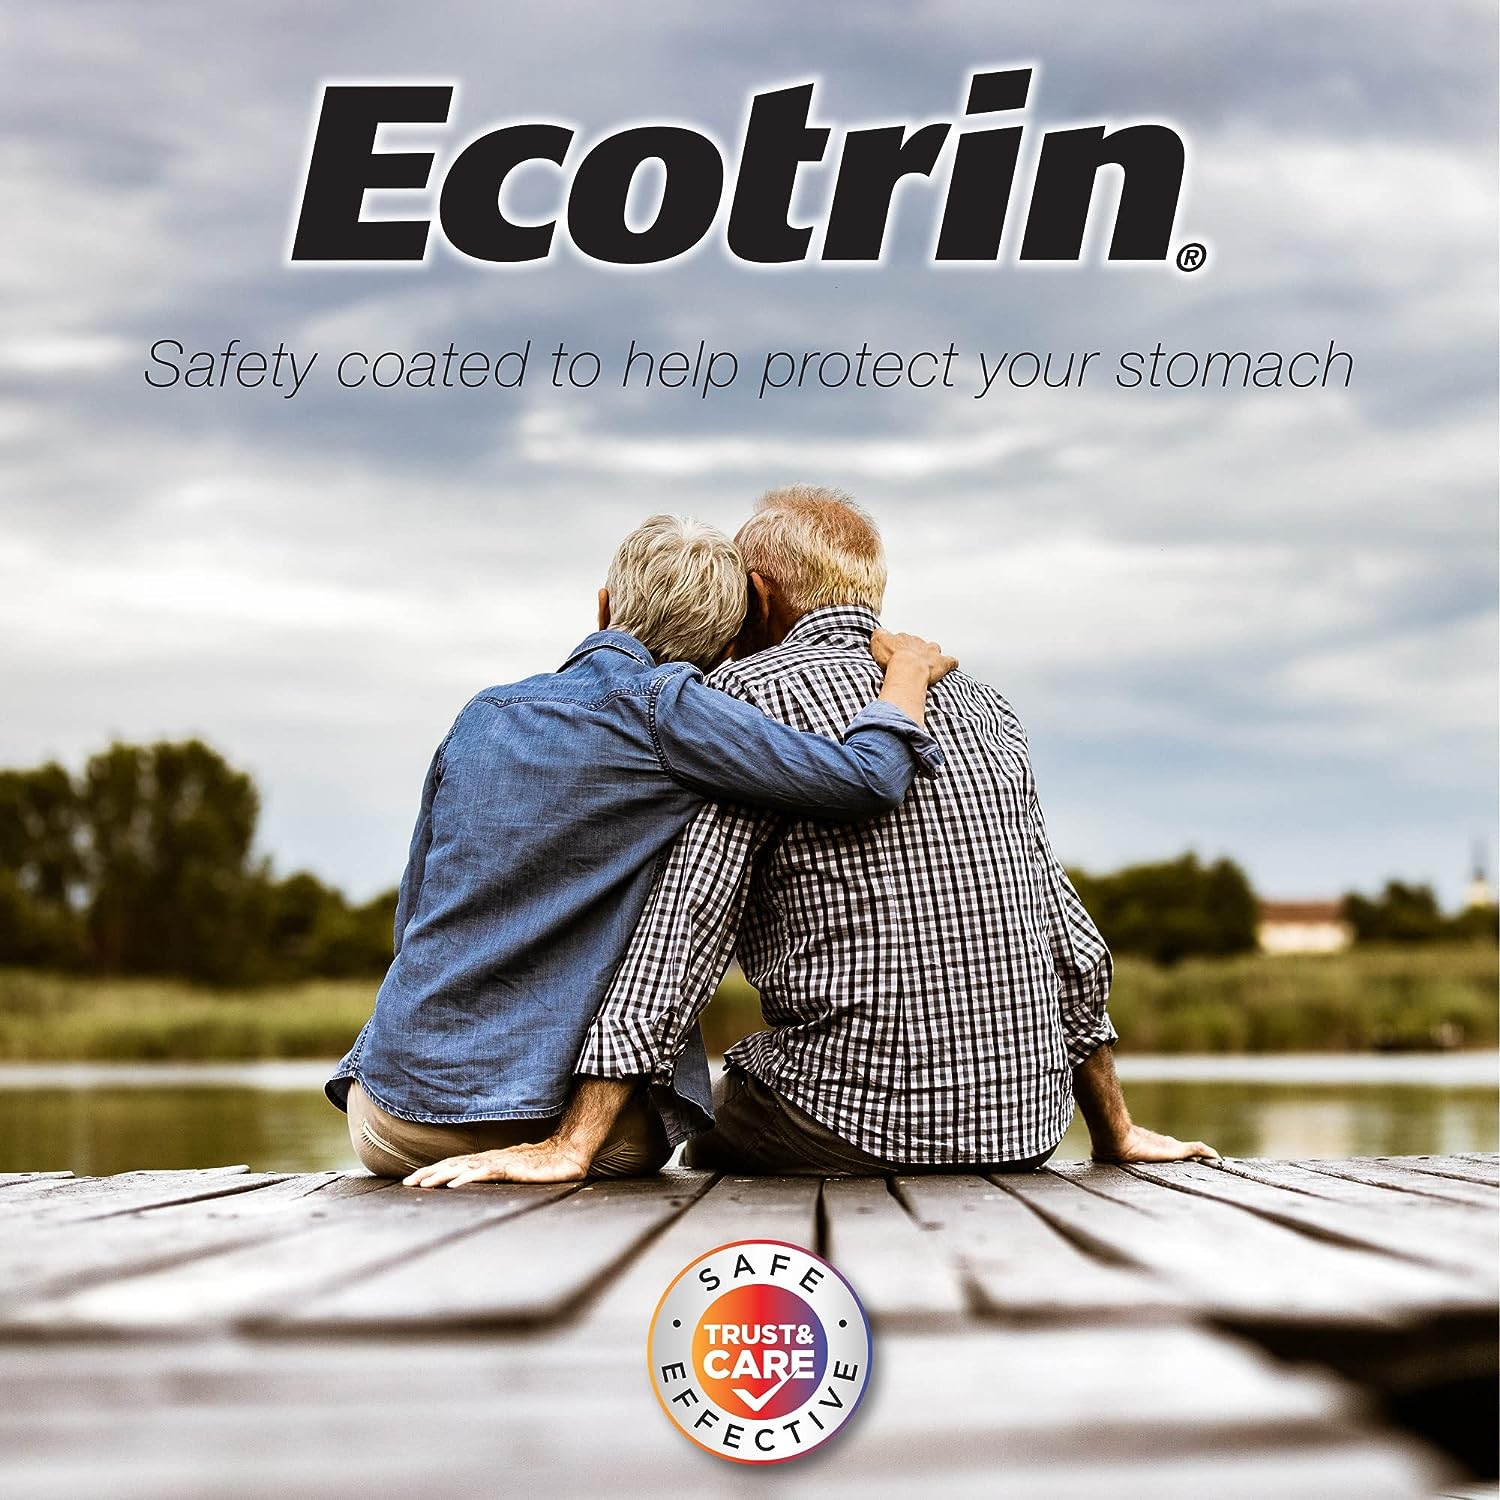 Ecotrin Low Strength Aspirin, 81mg Low Strength, 150 Safety Coated Tab